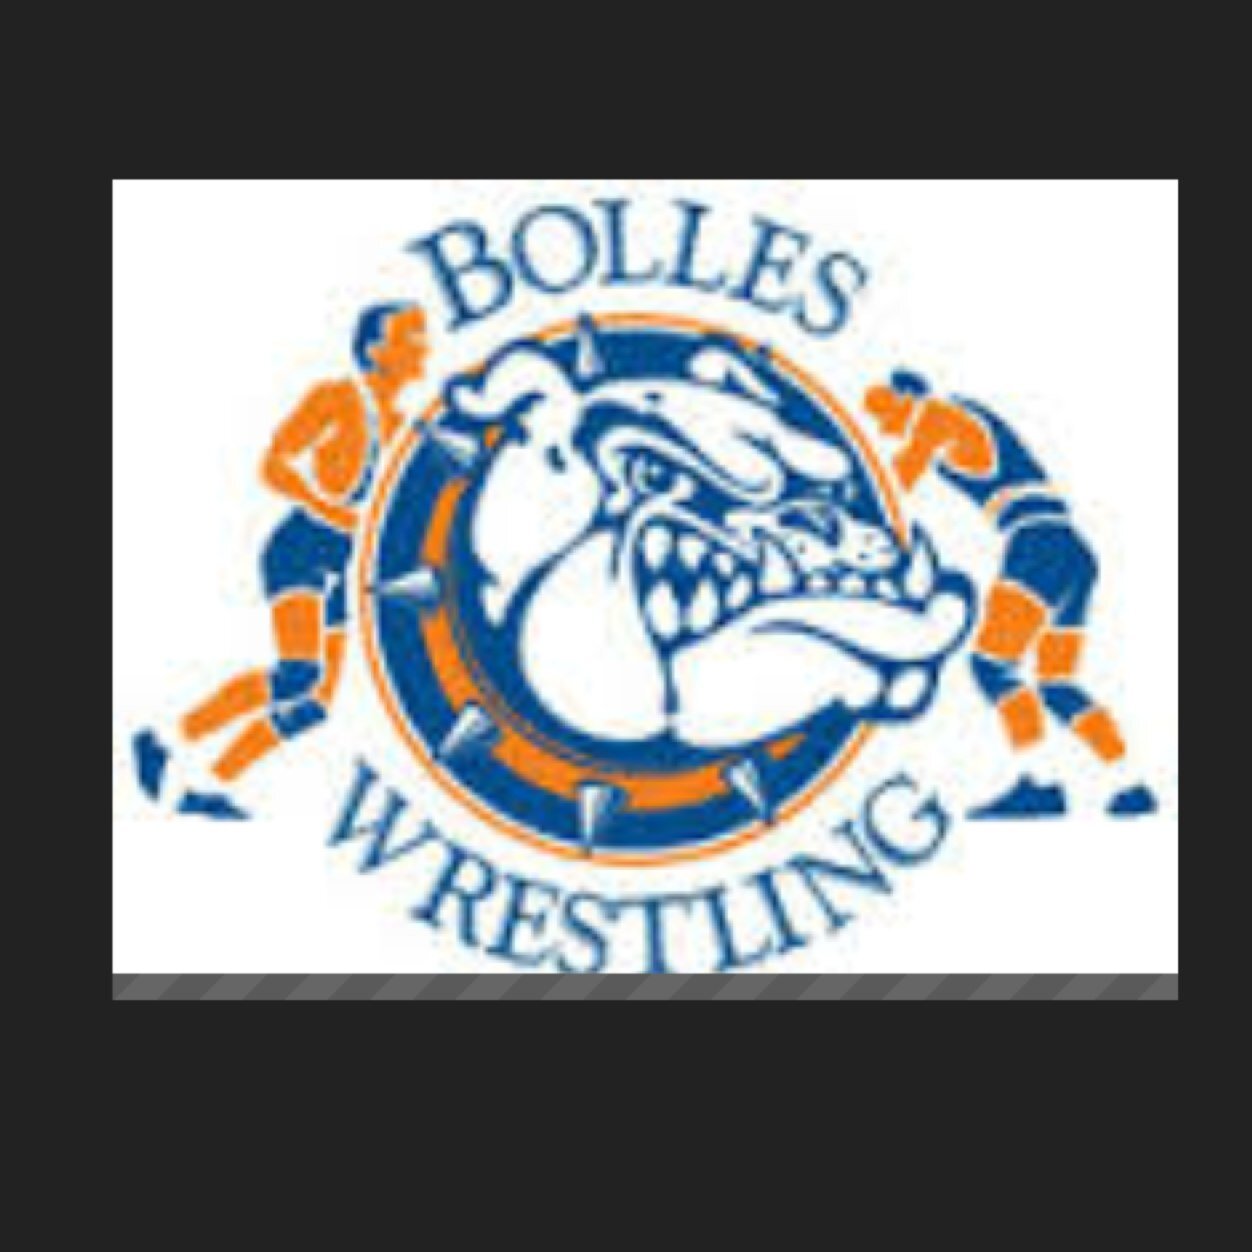 The official twitter page of Bolles Wrestling